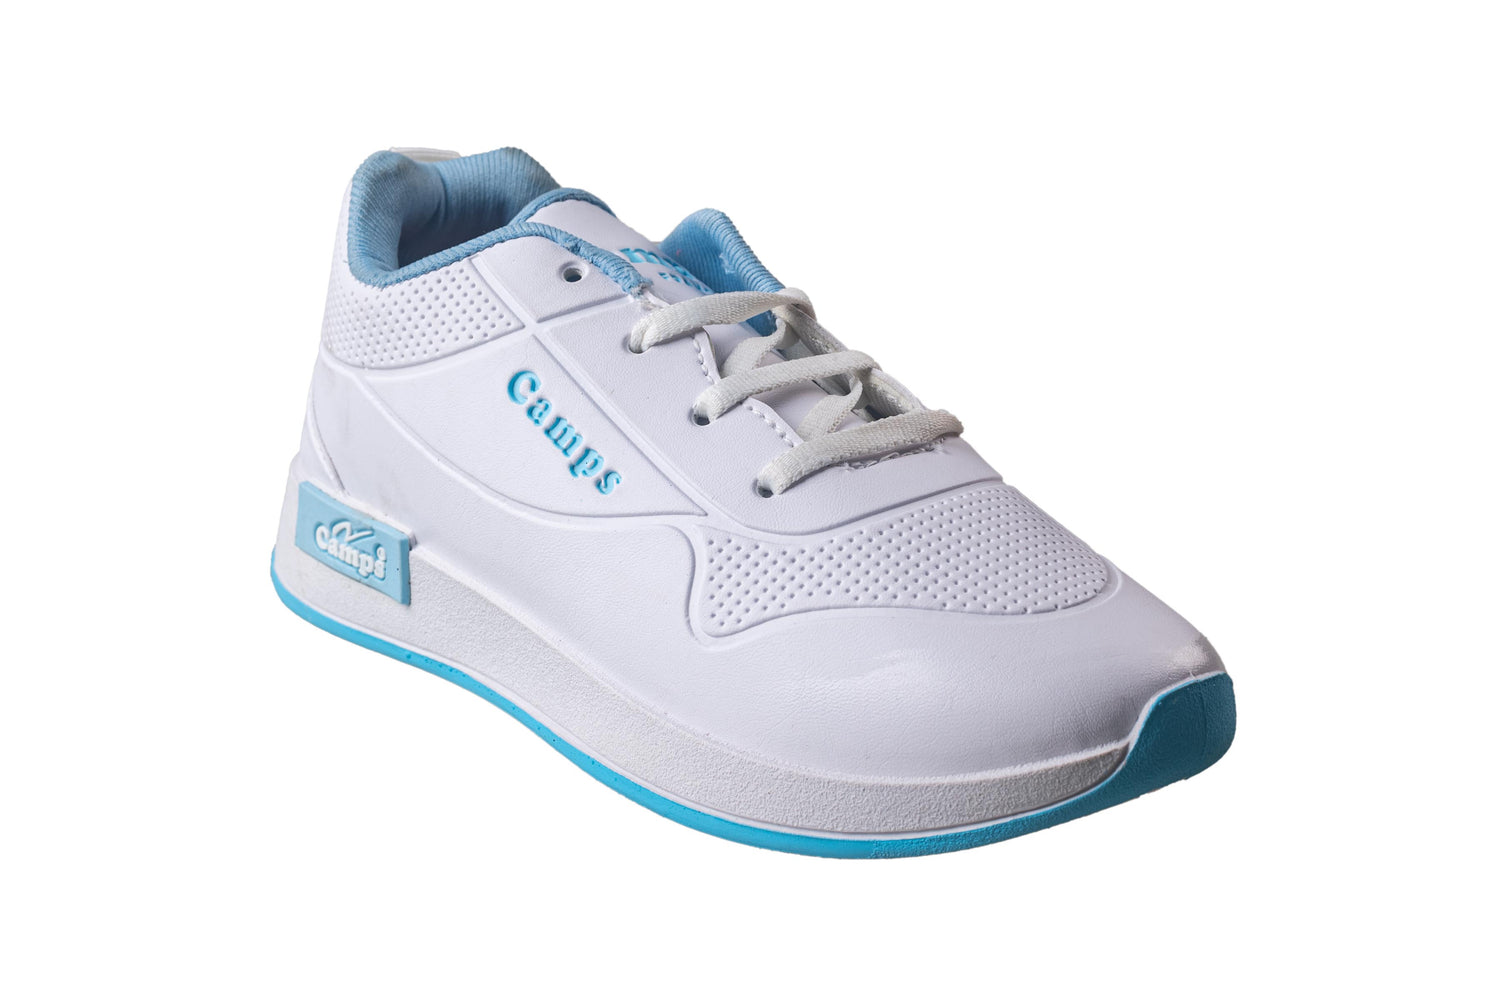 Camps Ladies White / Sky Sports Shoe